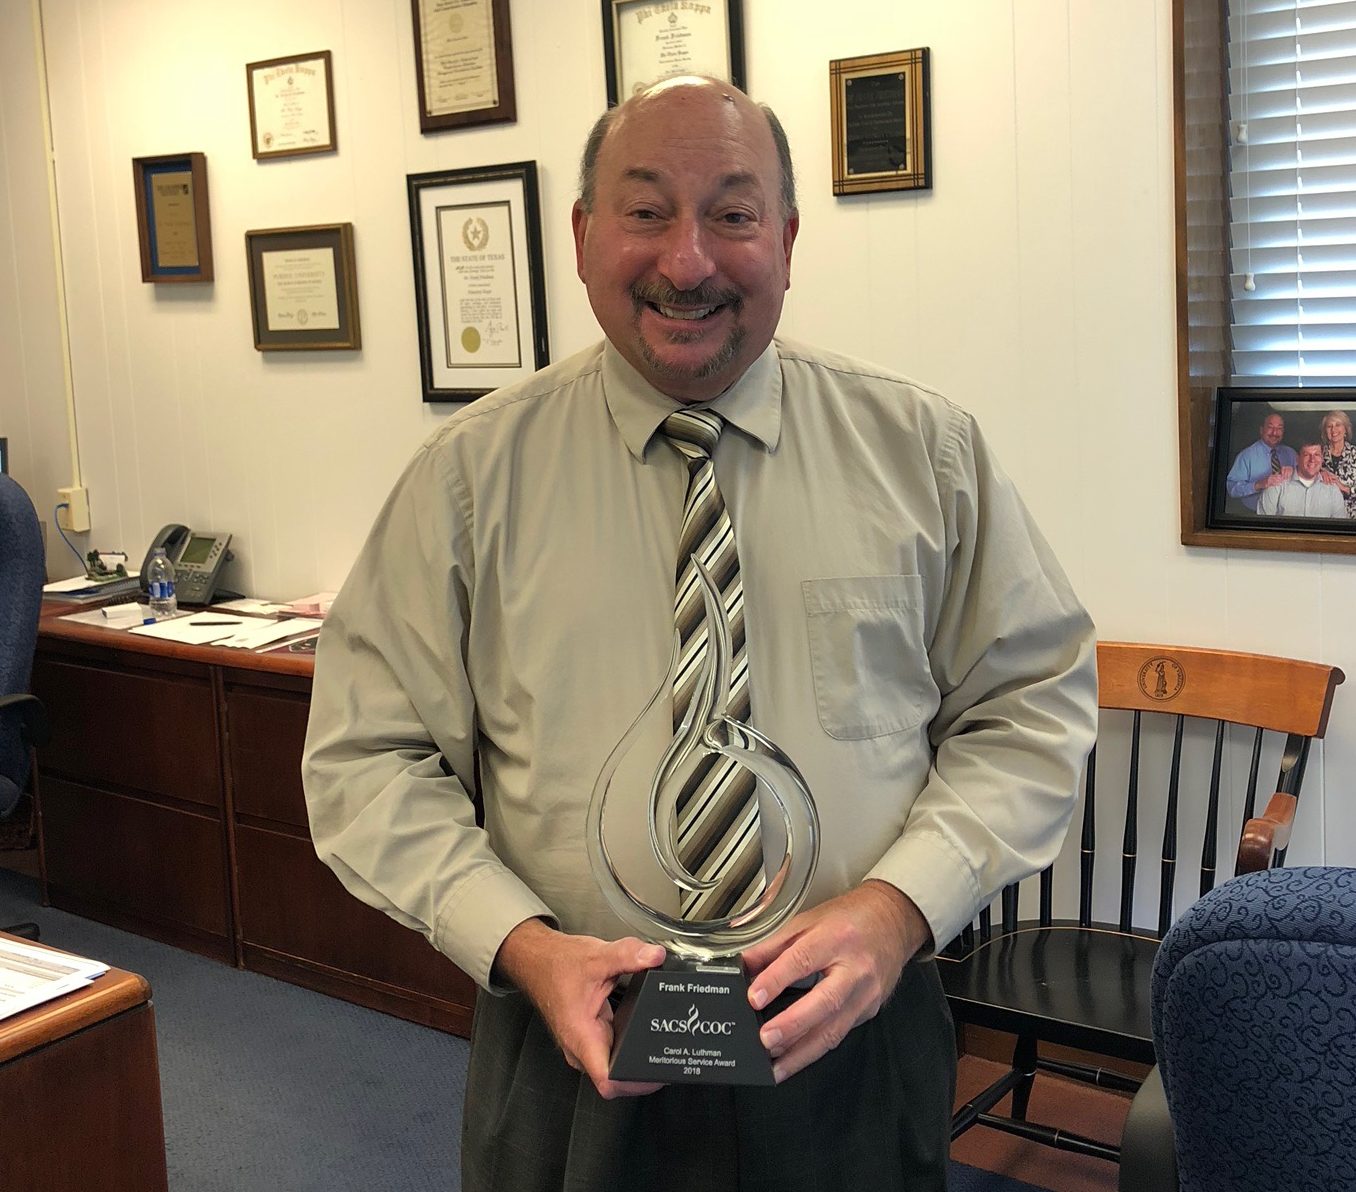 PVCC President showing off his award that he received for his years of service.